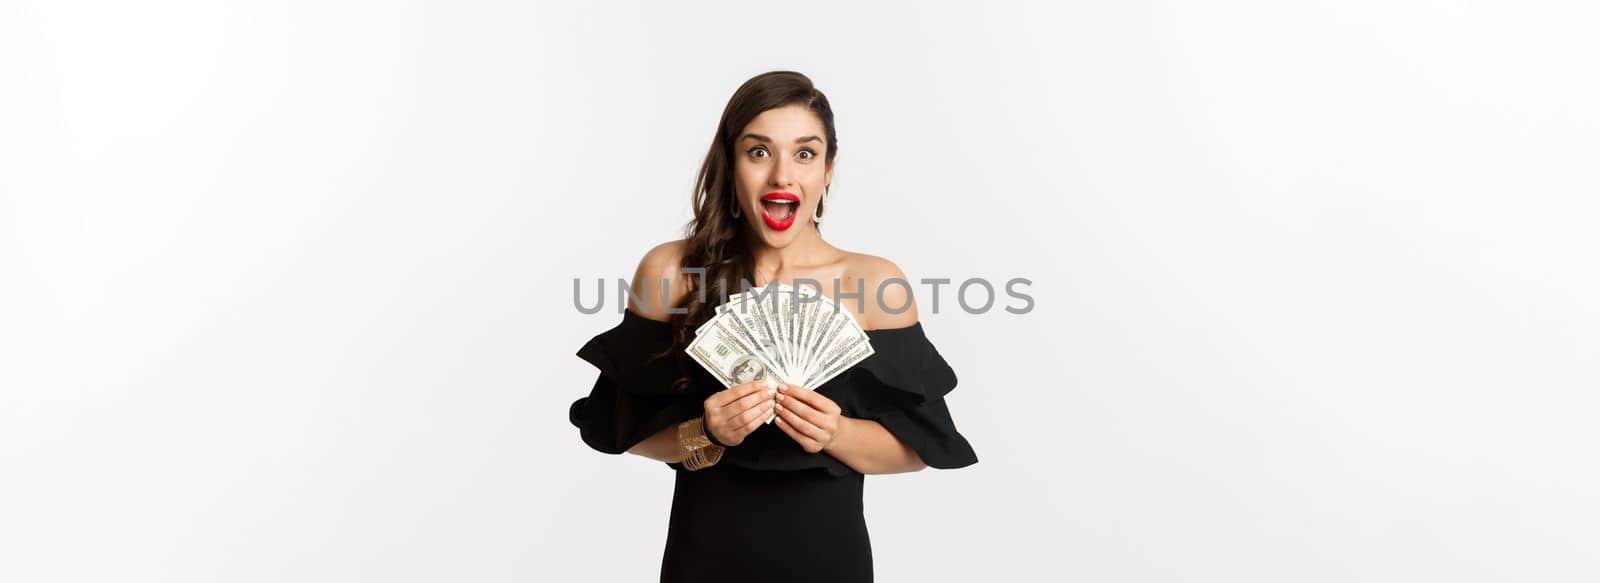 Beauty and shopping concept. Excited woman in black dress, showing money prize and staring happy at camera, standing over white background.